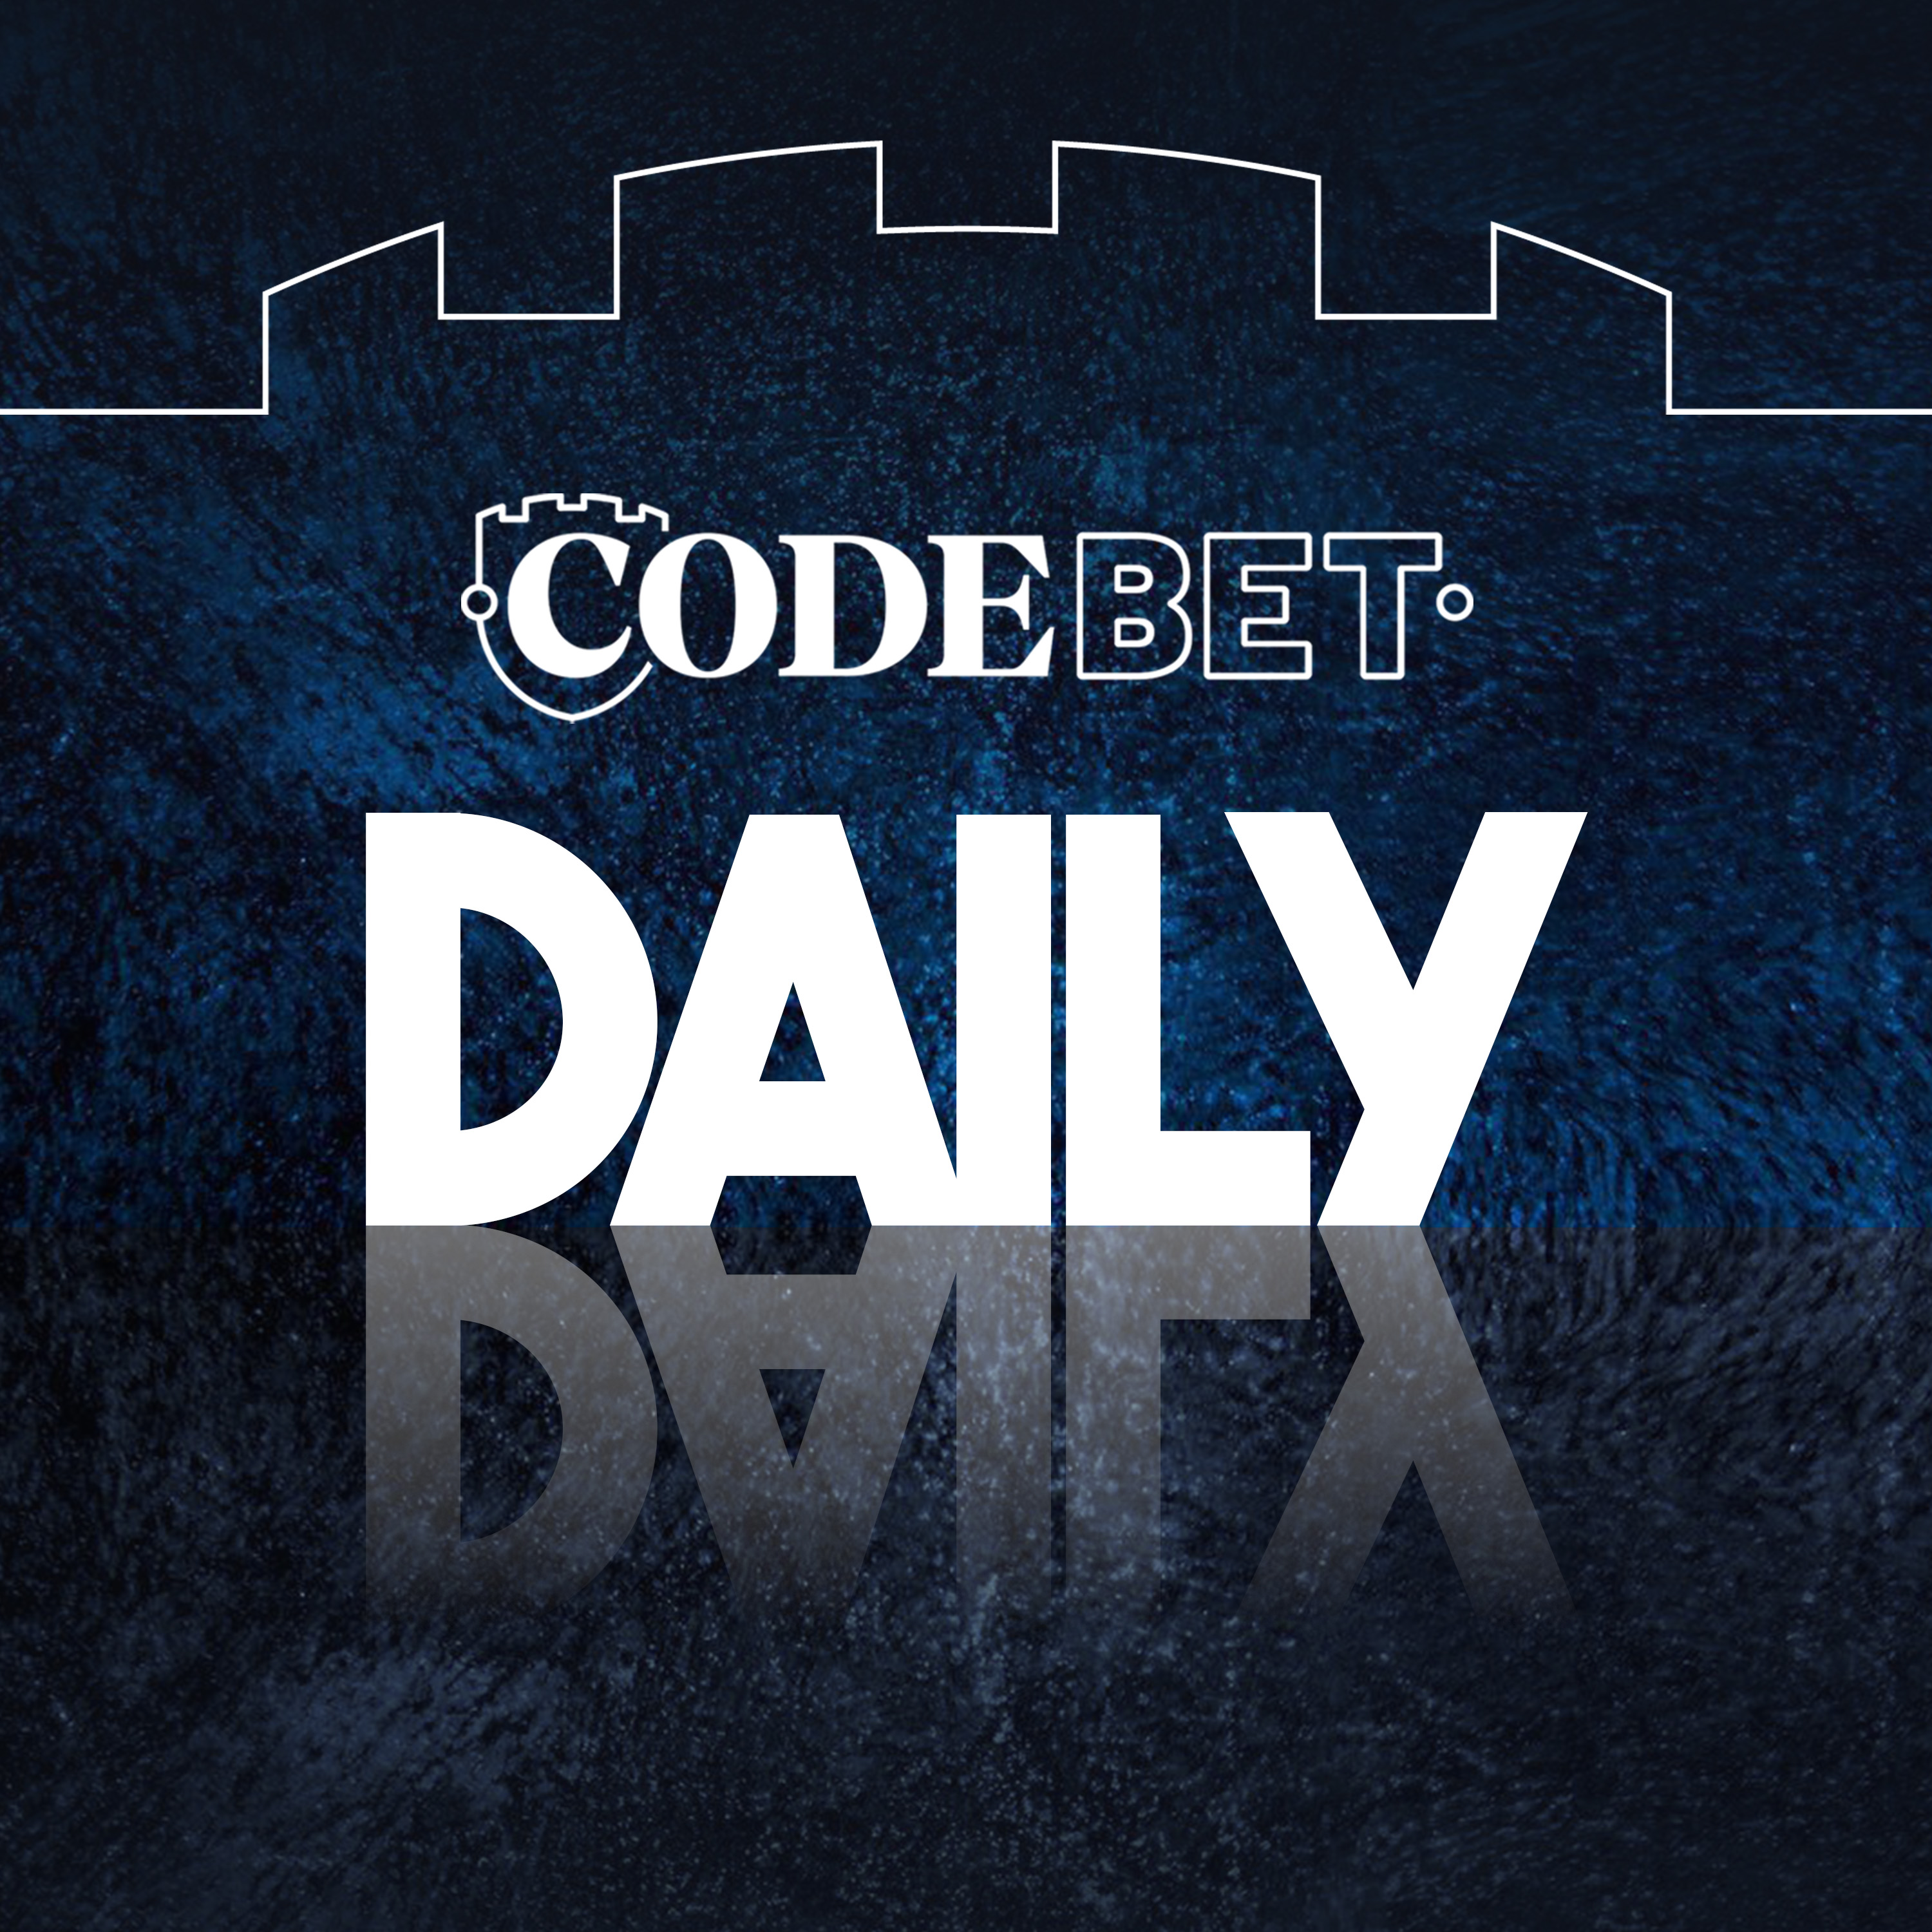 CODE Bet Daily